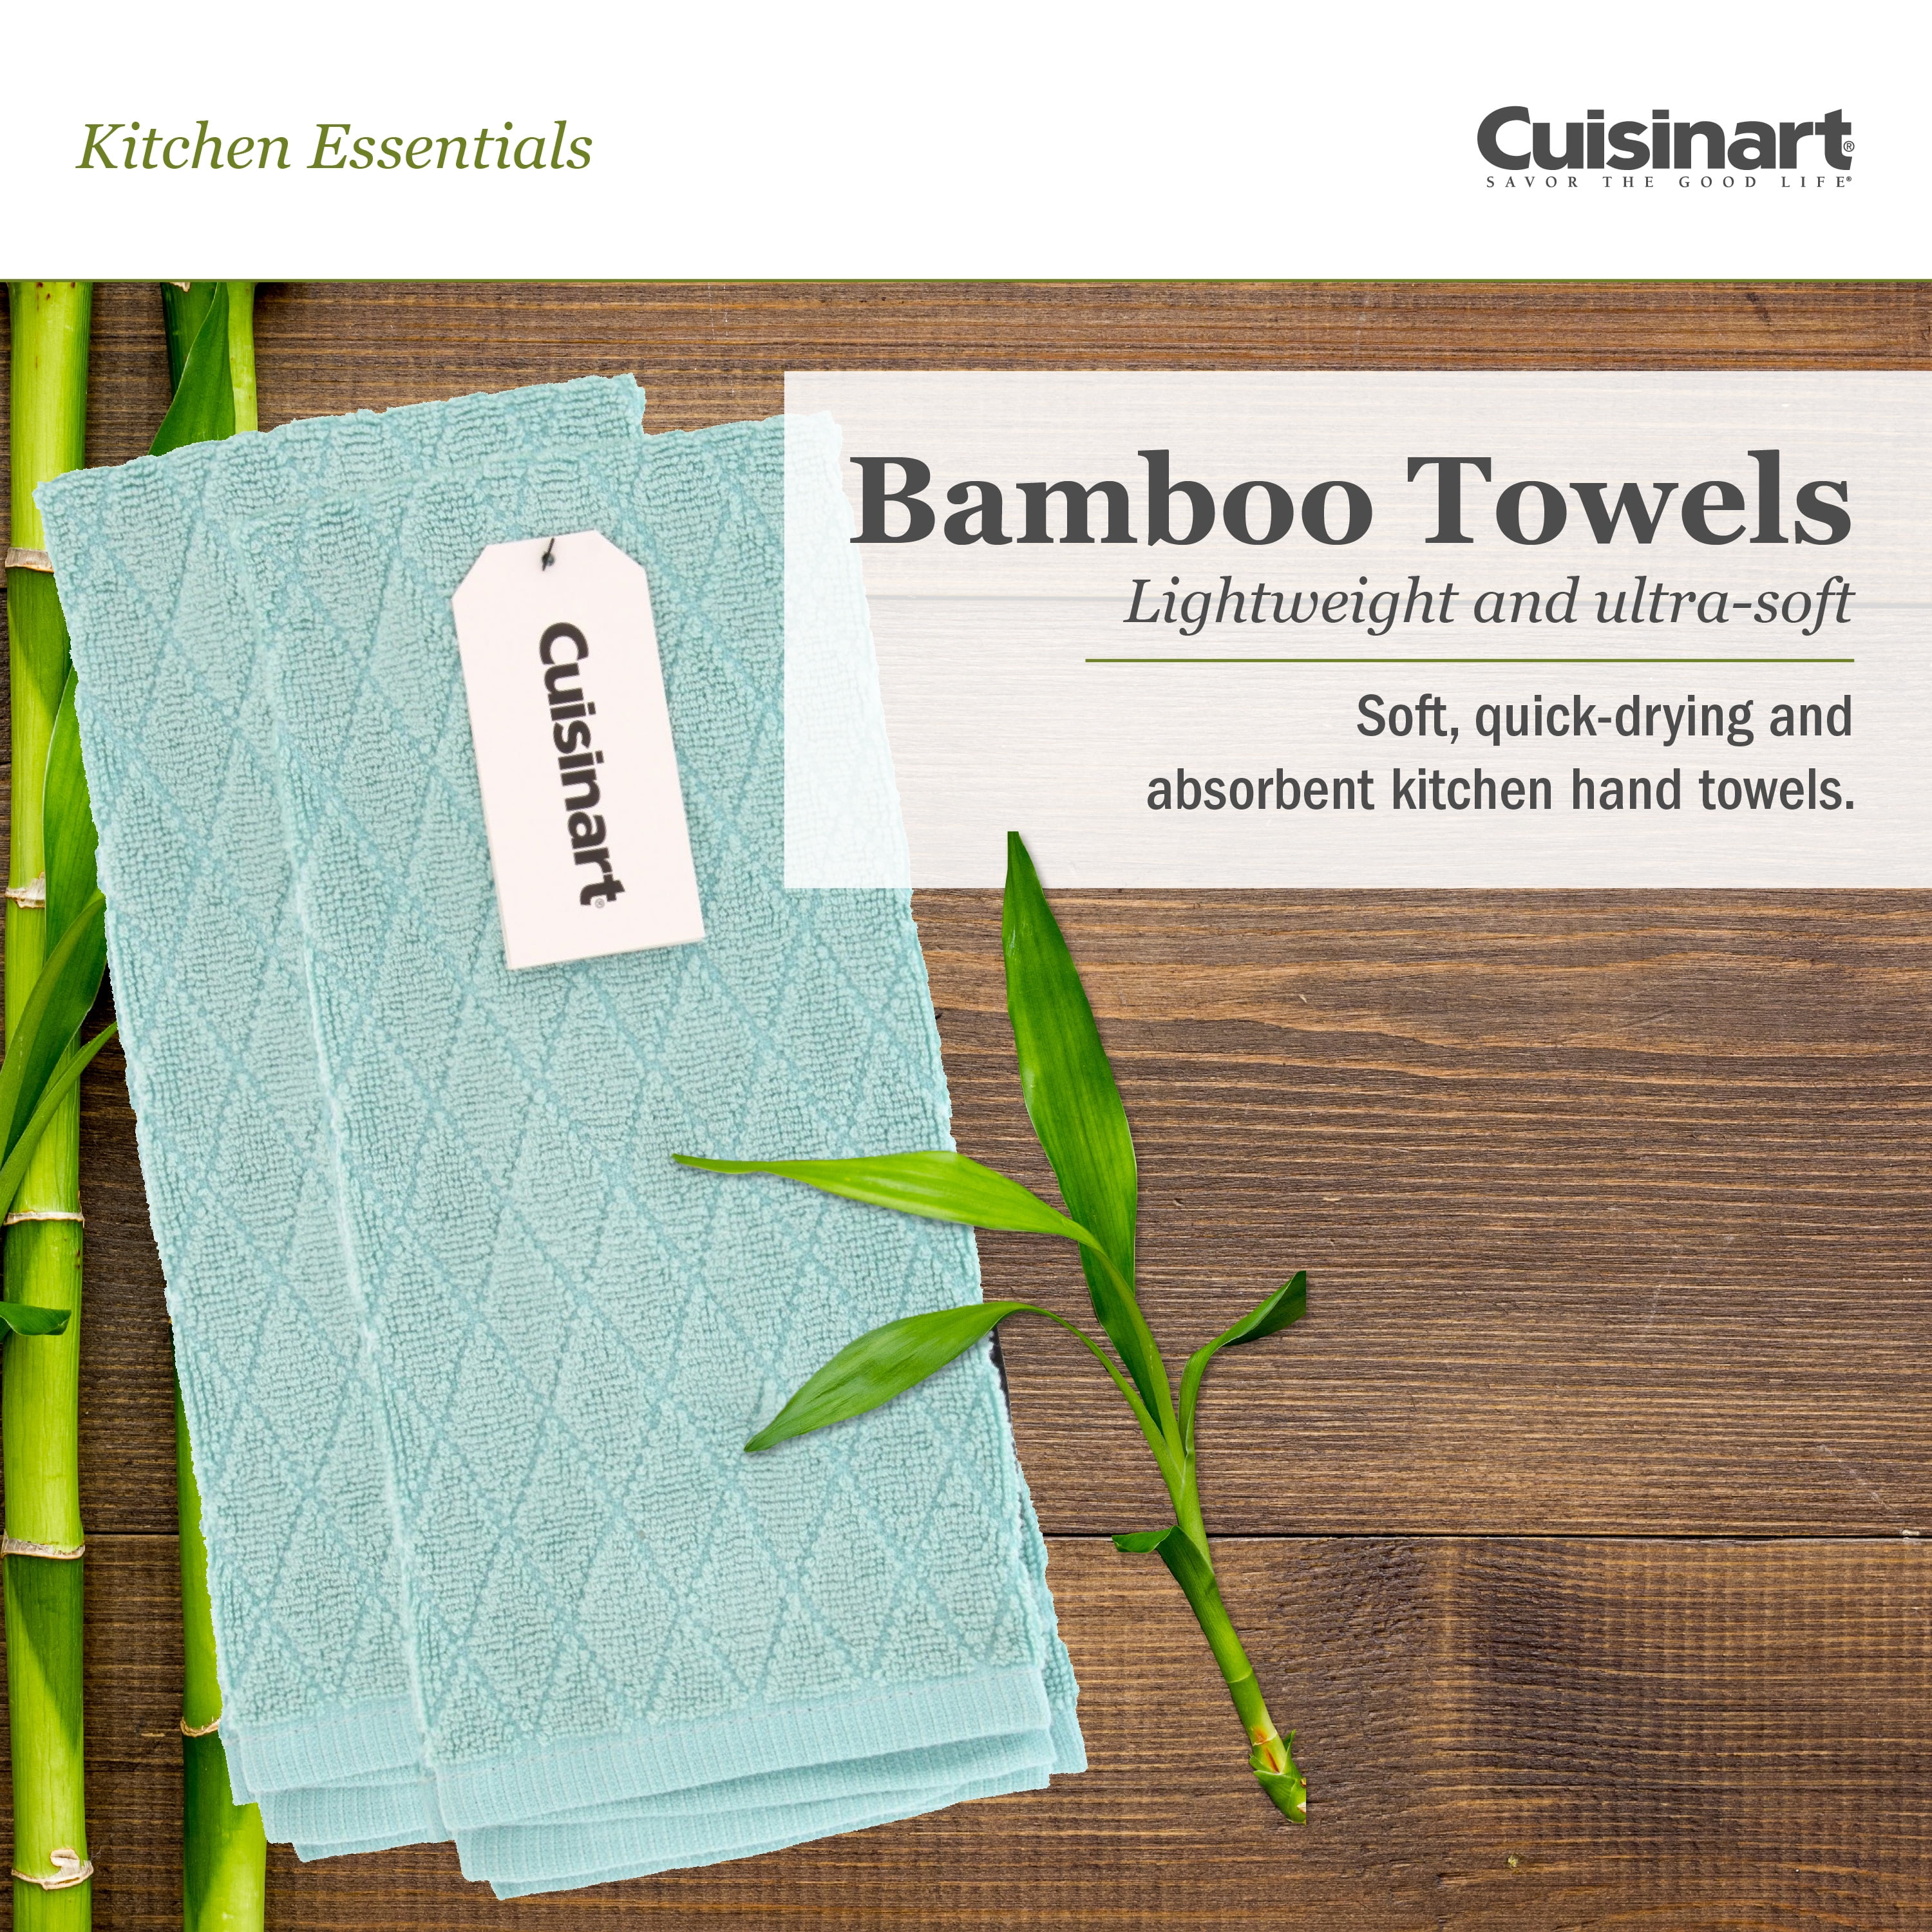 Cuisinart 100% Cotton Kitchen Hand Towels, 2pk - Soft and Absorbent Kitchen Towels Perfect for Drying Dishes and Hands-Hygienic Bleachable Kitchen